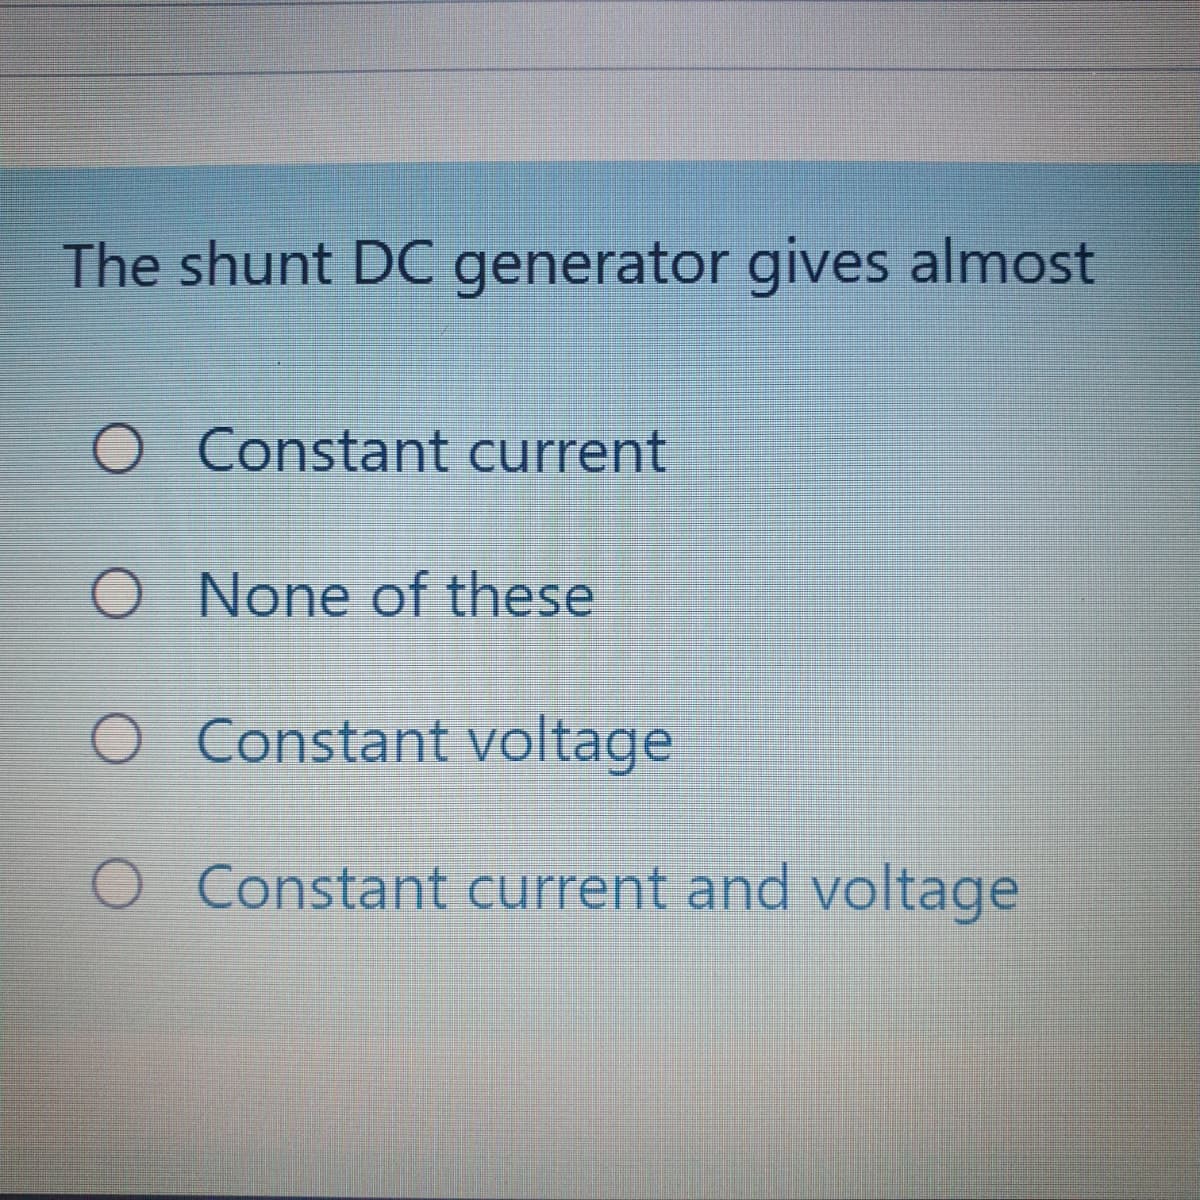 The shunt DC generator gives almost
O Constant current
O None of these
O Constant voltage
O Constant current and voltage
